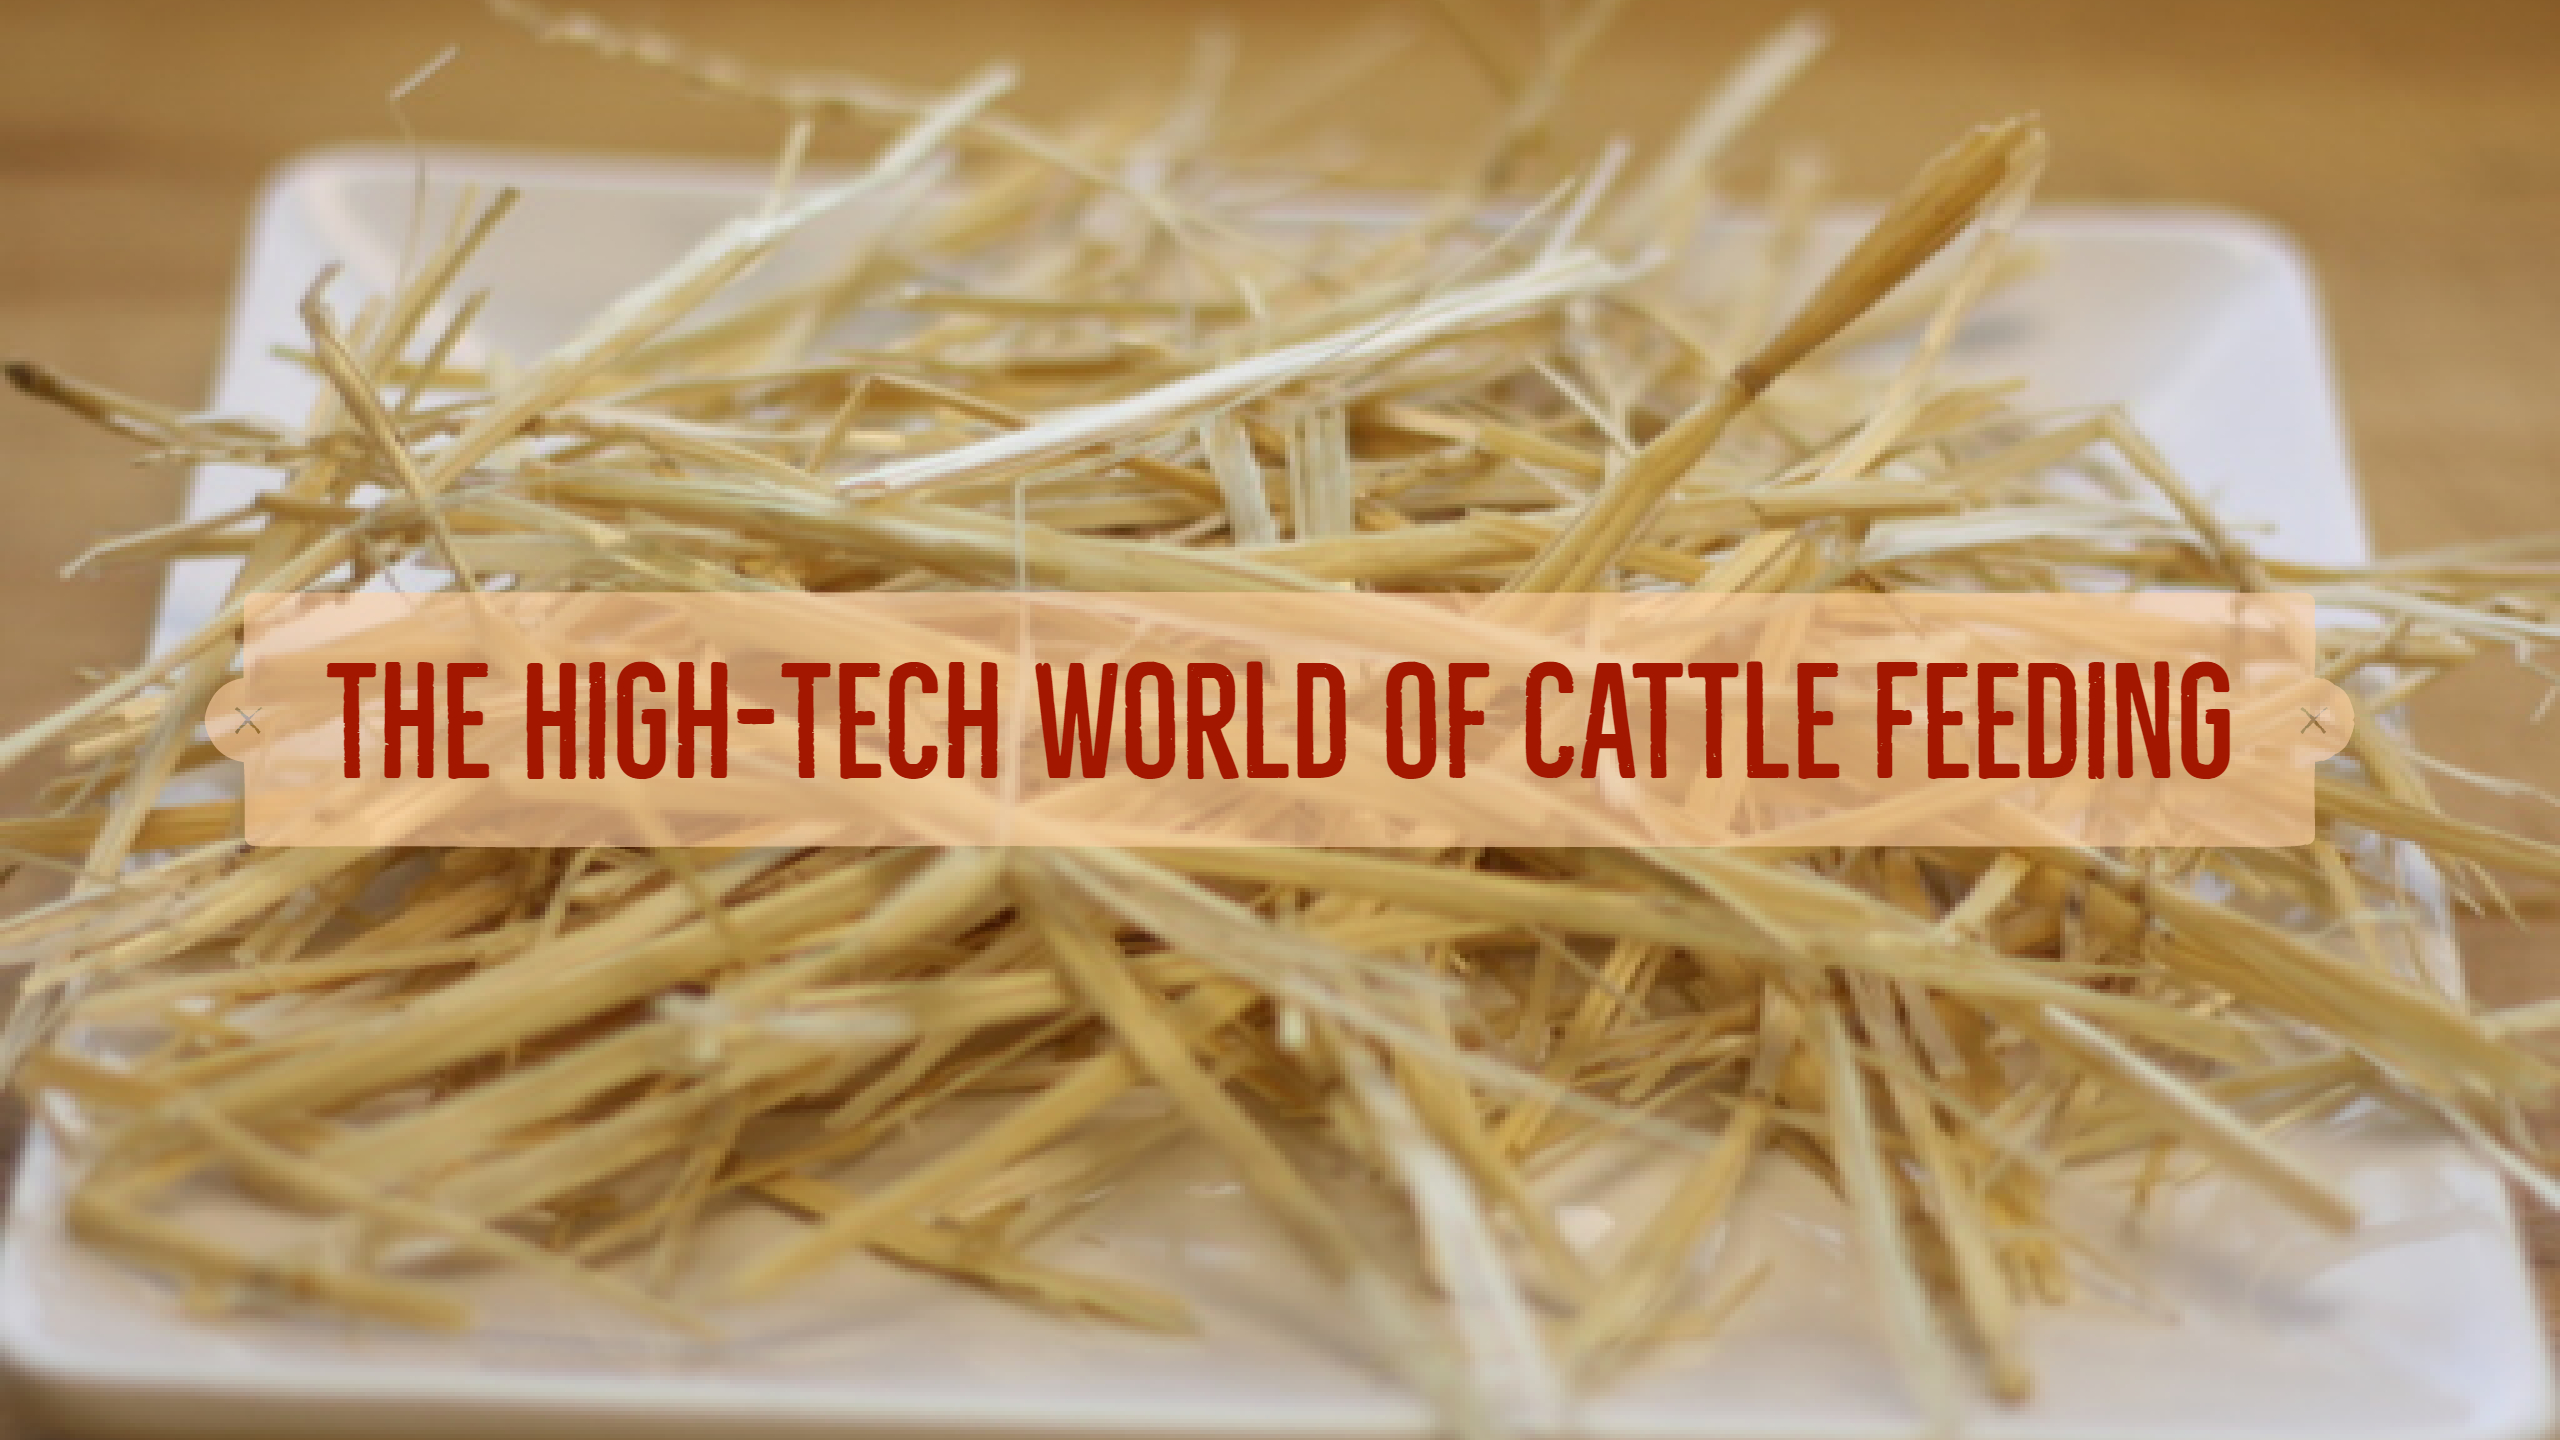 Improving Cattle Care Through Technology